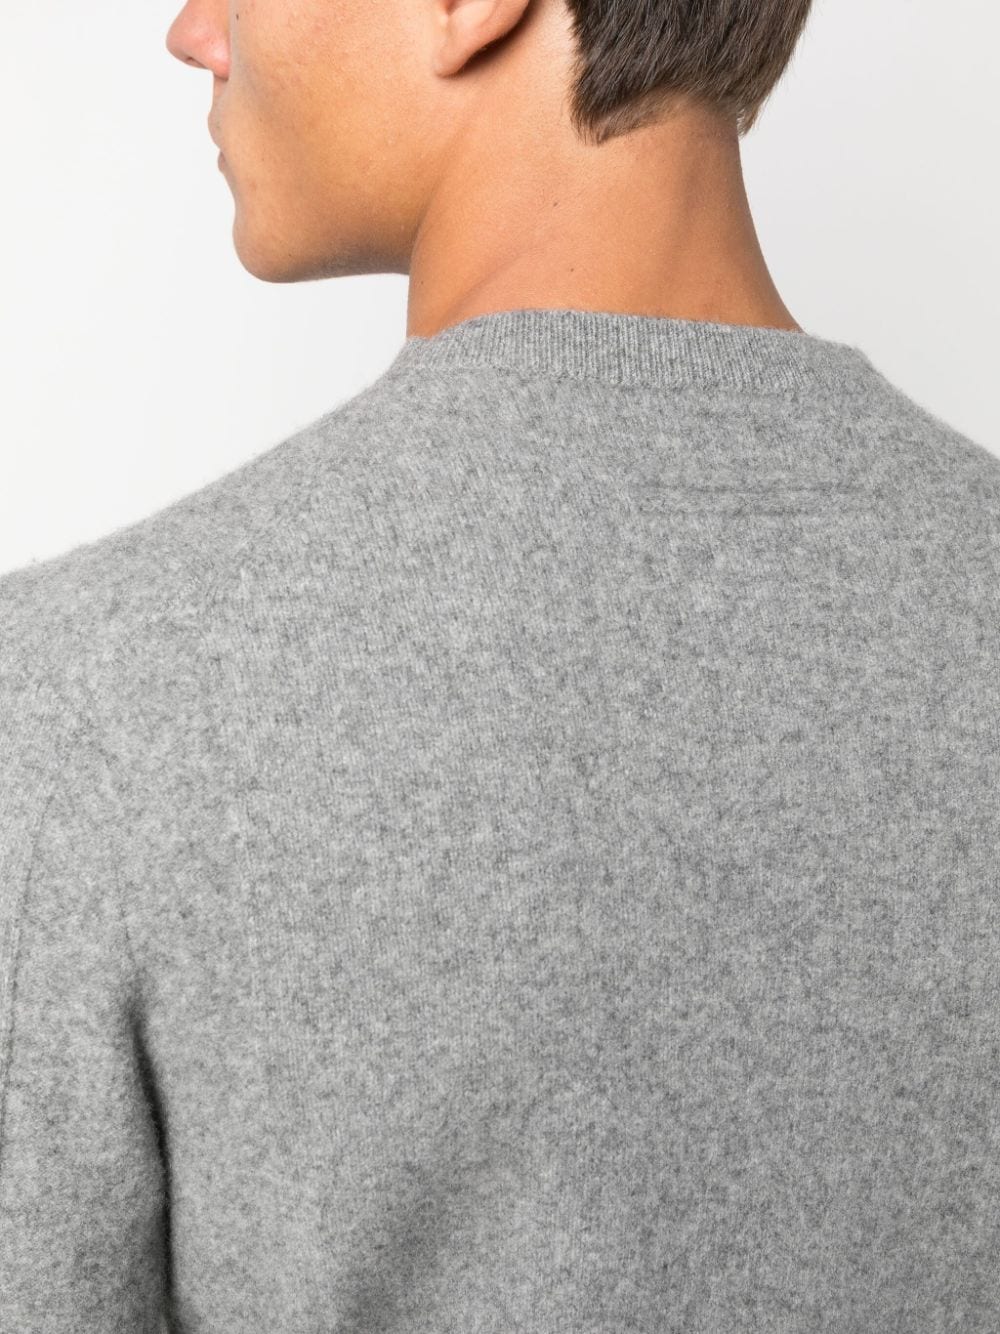 Shop Zegna Wool And Cashmere Crew Neck Sweater